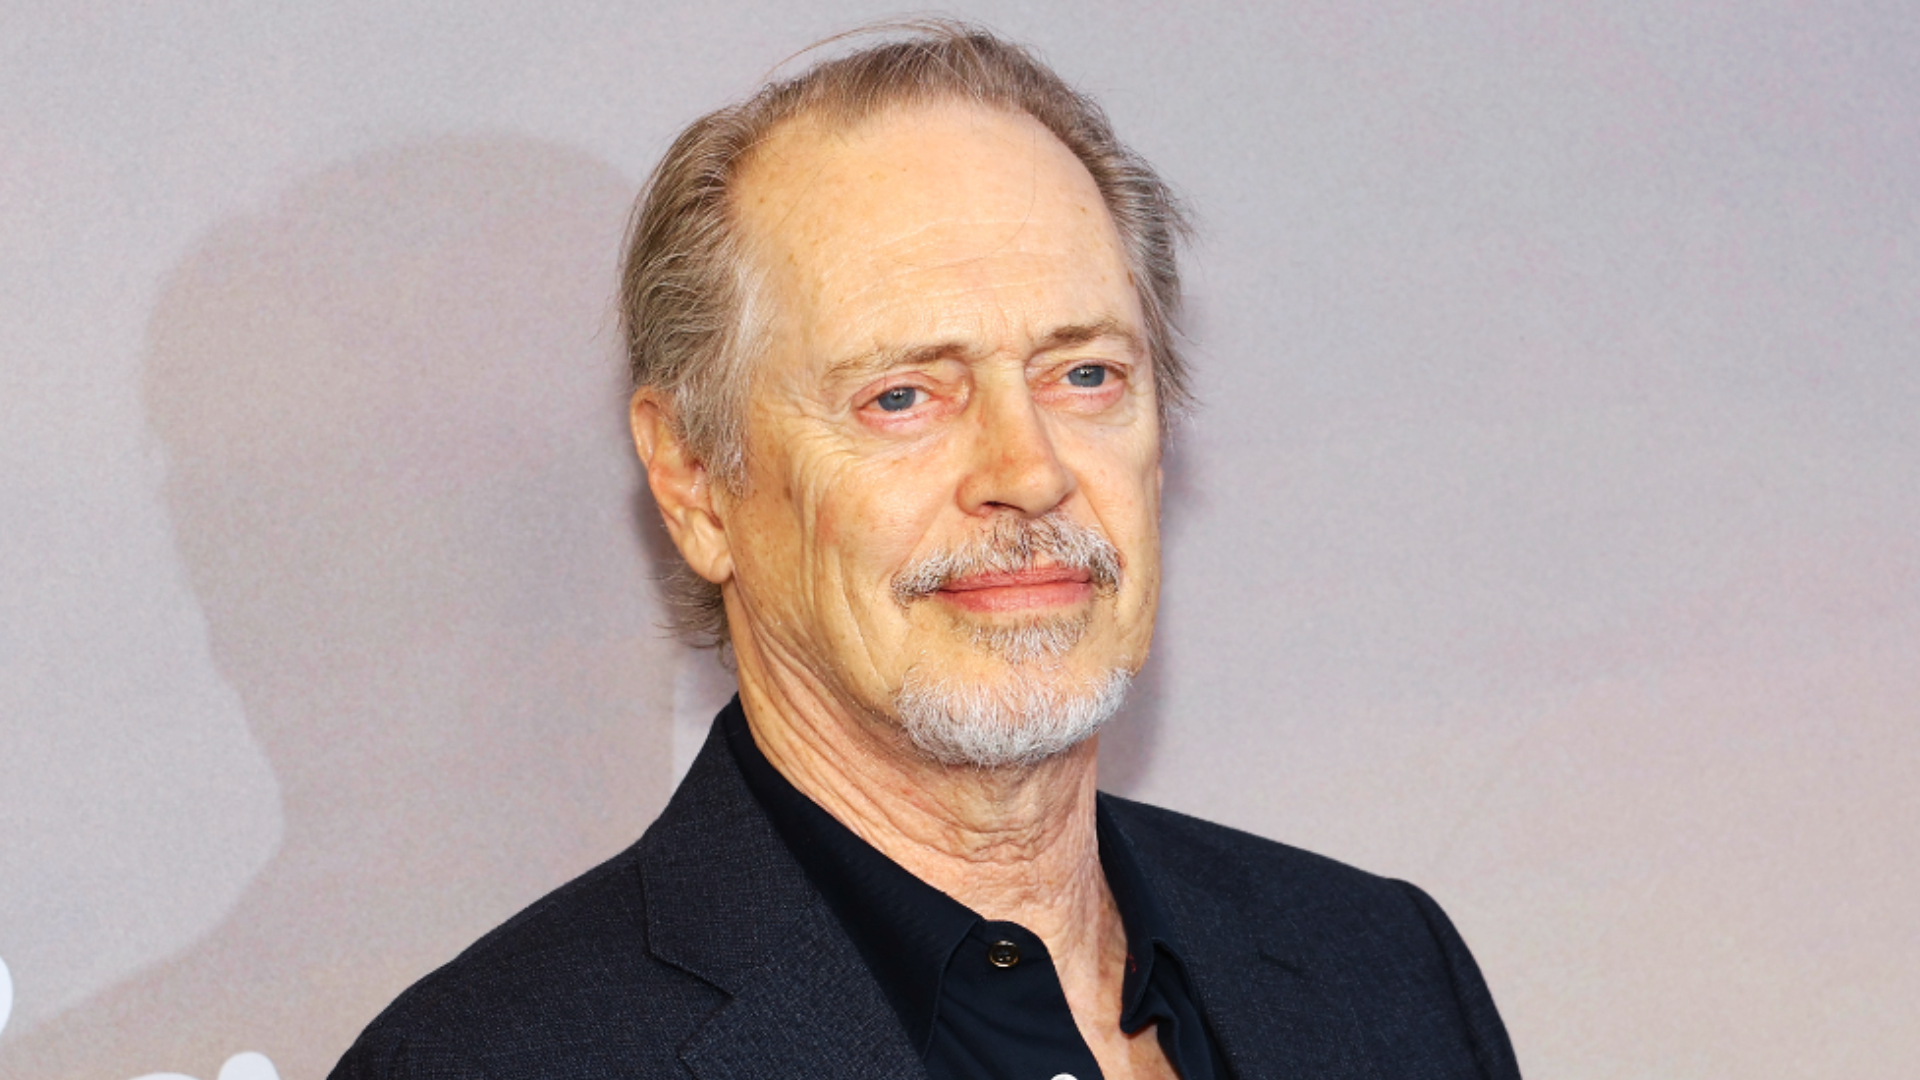 ‘Fargo’ Actor Steve Buscemi Was Left Bleeding In The Left Eye After Getting Punched In The Face In Random NYC Attack